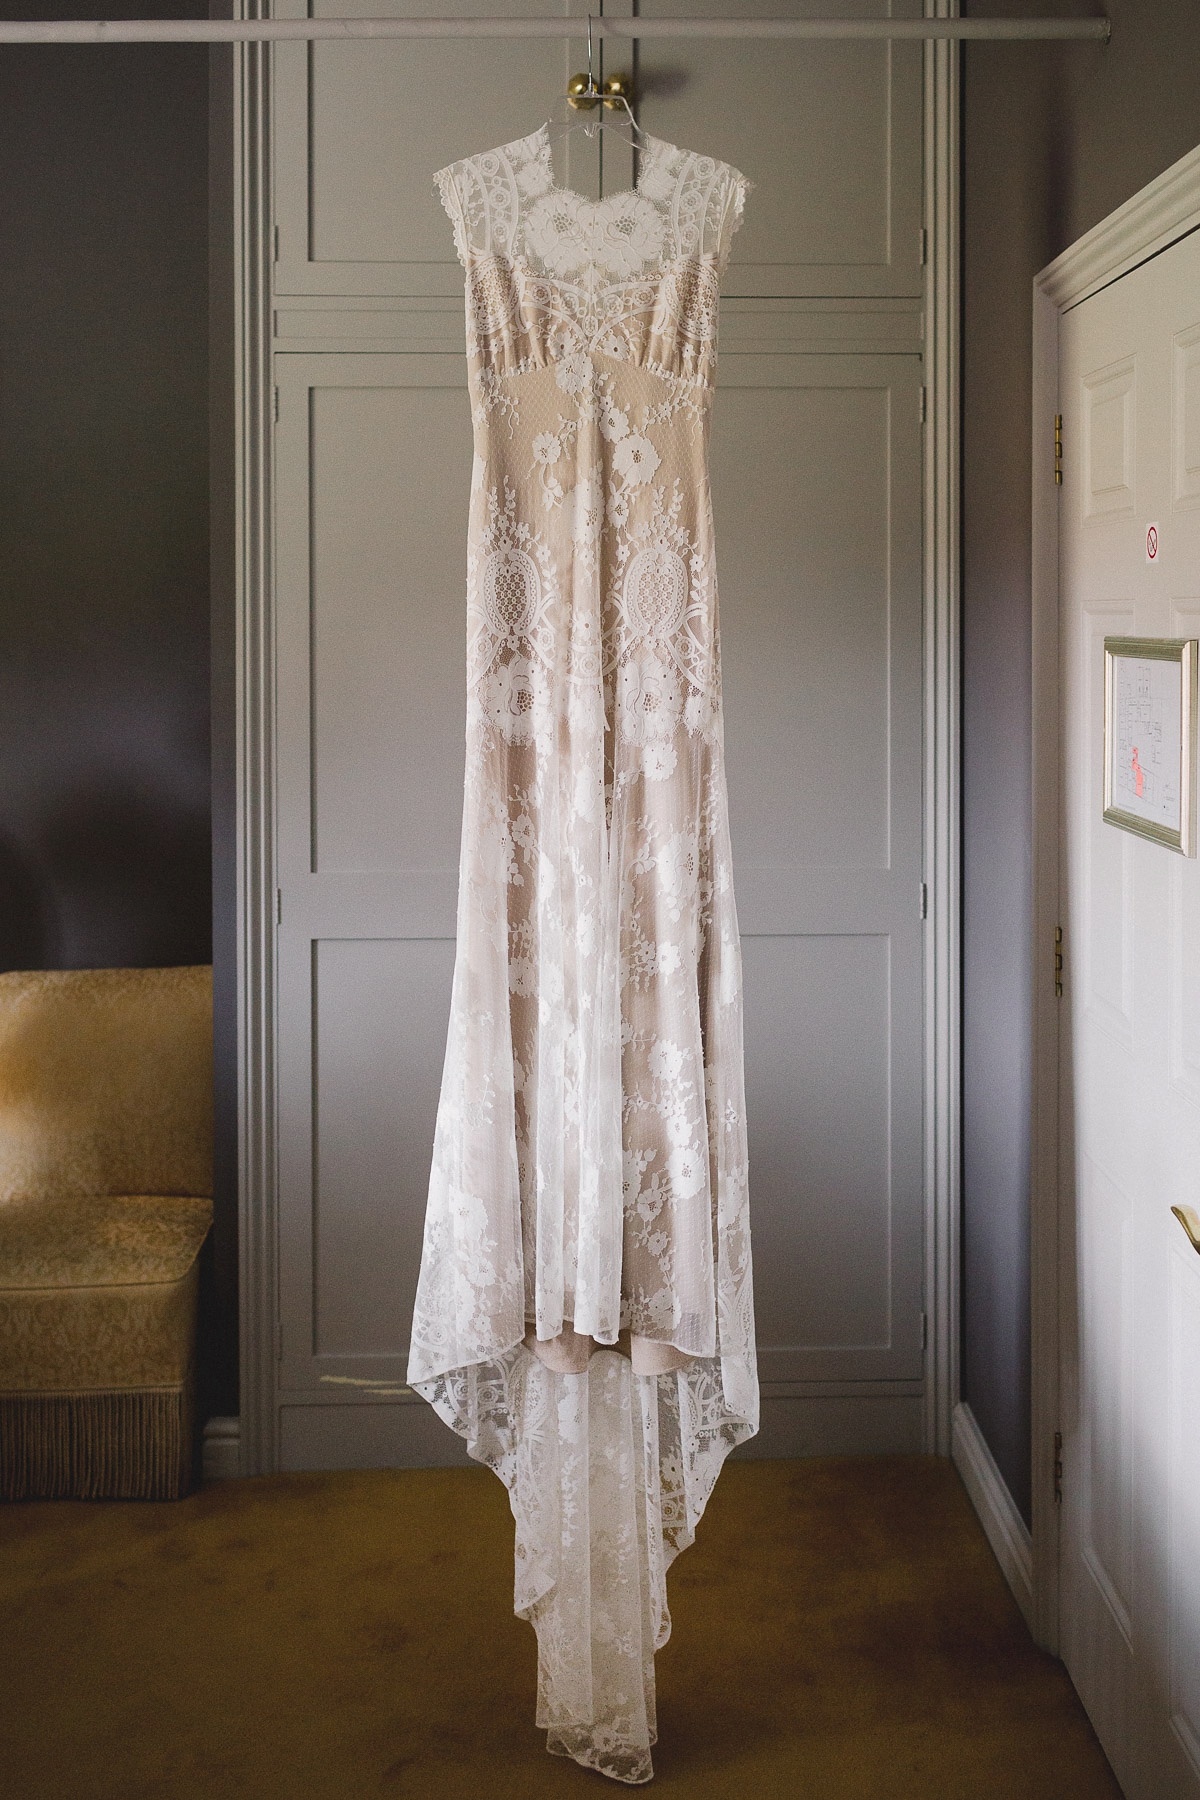 A Claire Pettibone Dress for a Low-Key, Intimate and Nature Inspired Wedding. Photography by Murray Clarke.